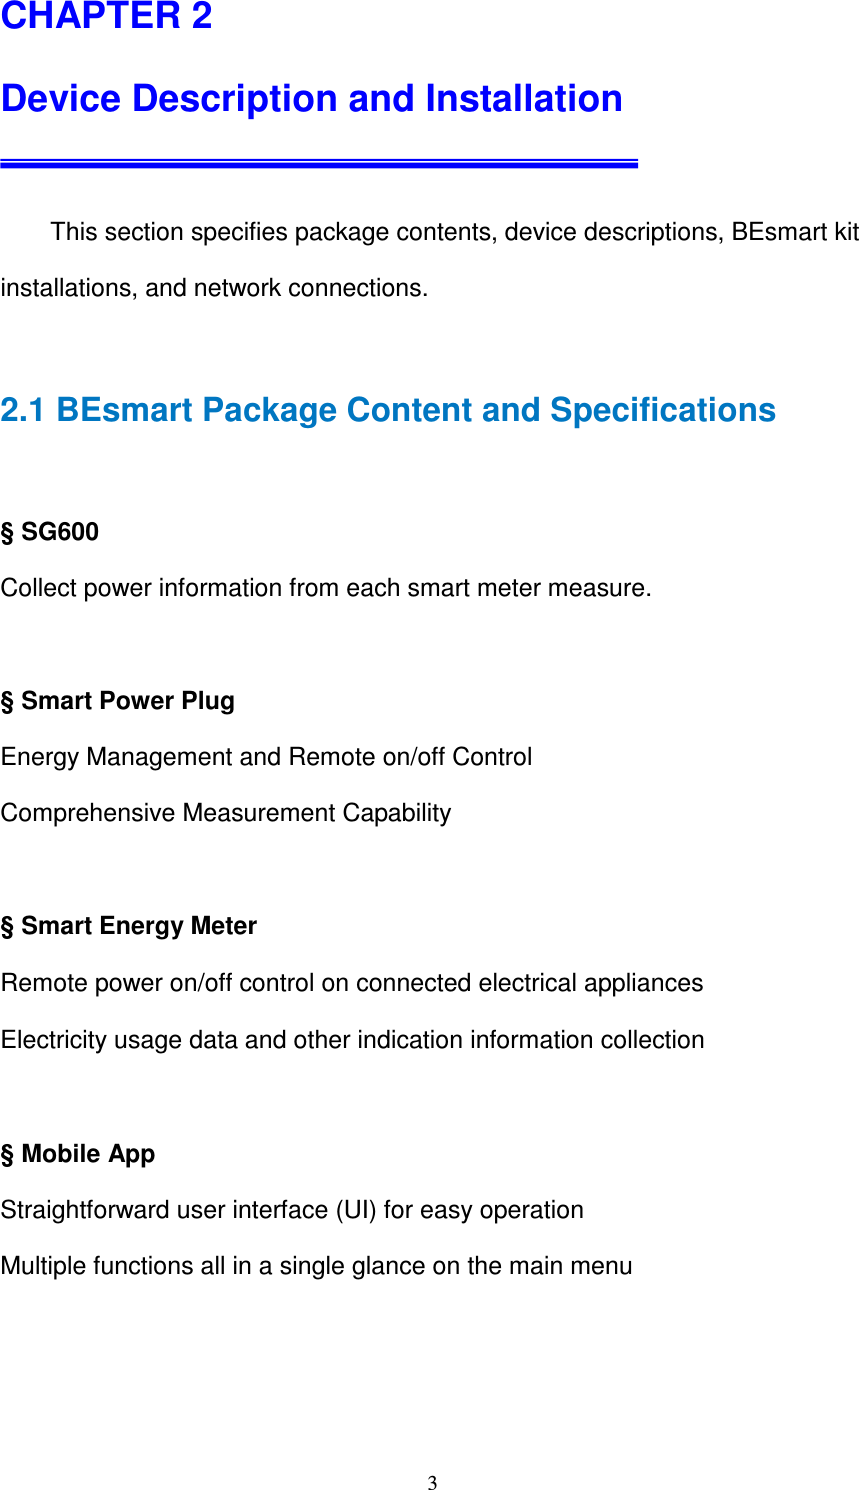   3CHAPTER 2  Device Description and Installation          This section specifies package contents, device descriptions, BEsmart kit installations, and network connections.  2.1 BEsmart Package Content and Specifications  § SG600 Collect power information from each smart meter measure.  § Smart Power Plug Energy Management and Remote on/off Control Comprehensive Measurement Capability  § Smart Energy Meter Remote power on/off control on connected electrical appliances   Electricity usage data and other indication information collection  § Mobile App Straightforward user interface (UI) for easy operation   Multiple functions all in a single glance on the main menu   